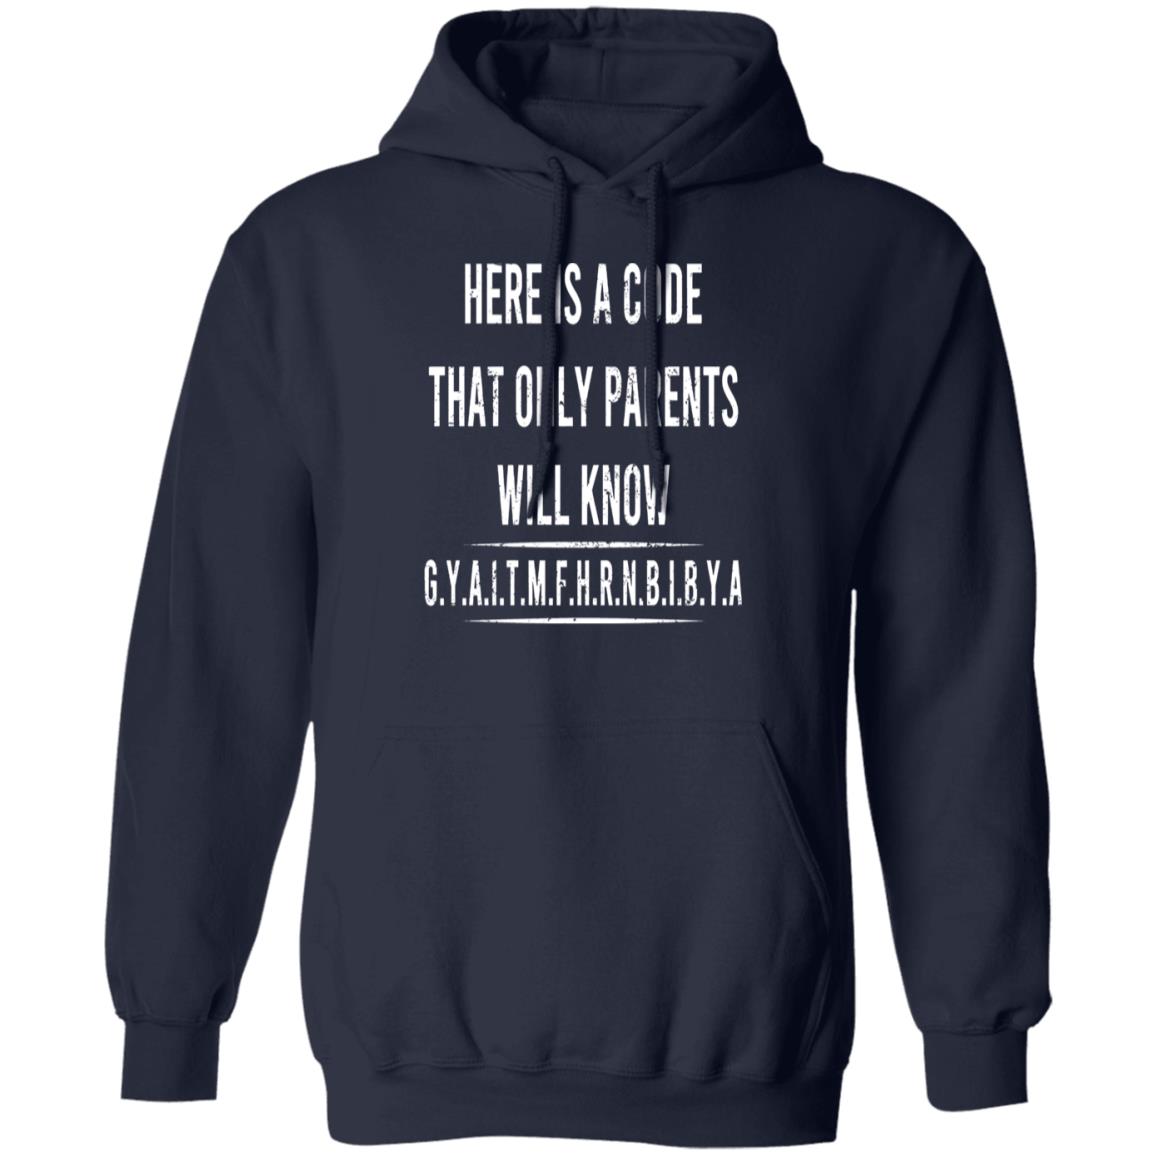 Here Is A Code That Only Parents Will Know GYAITMFHRNBIBYA Hoodie